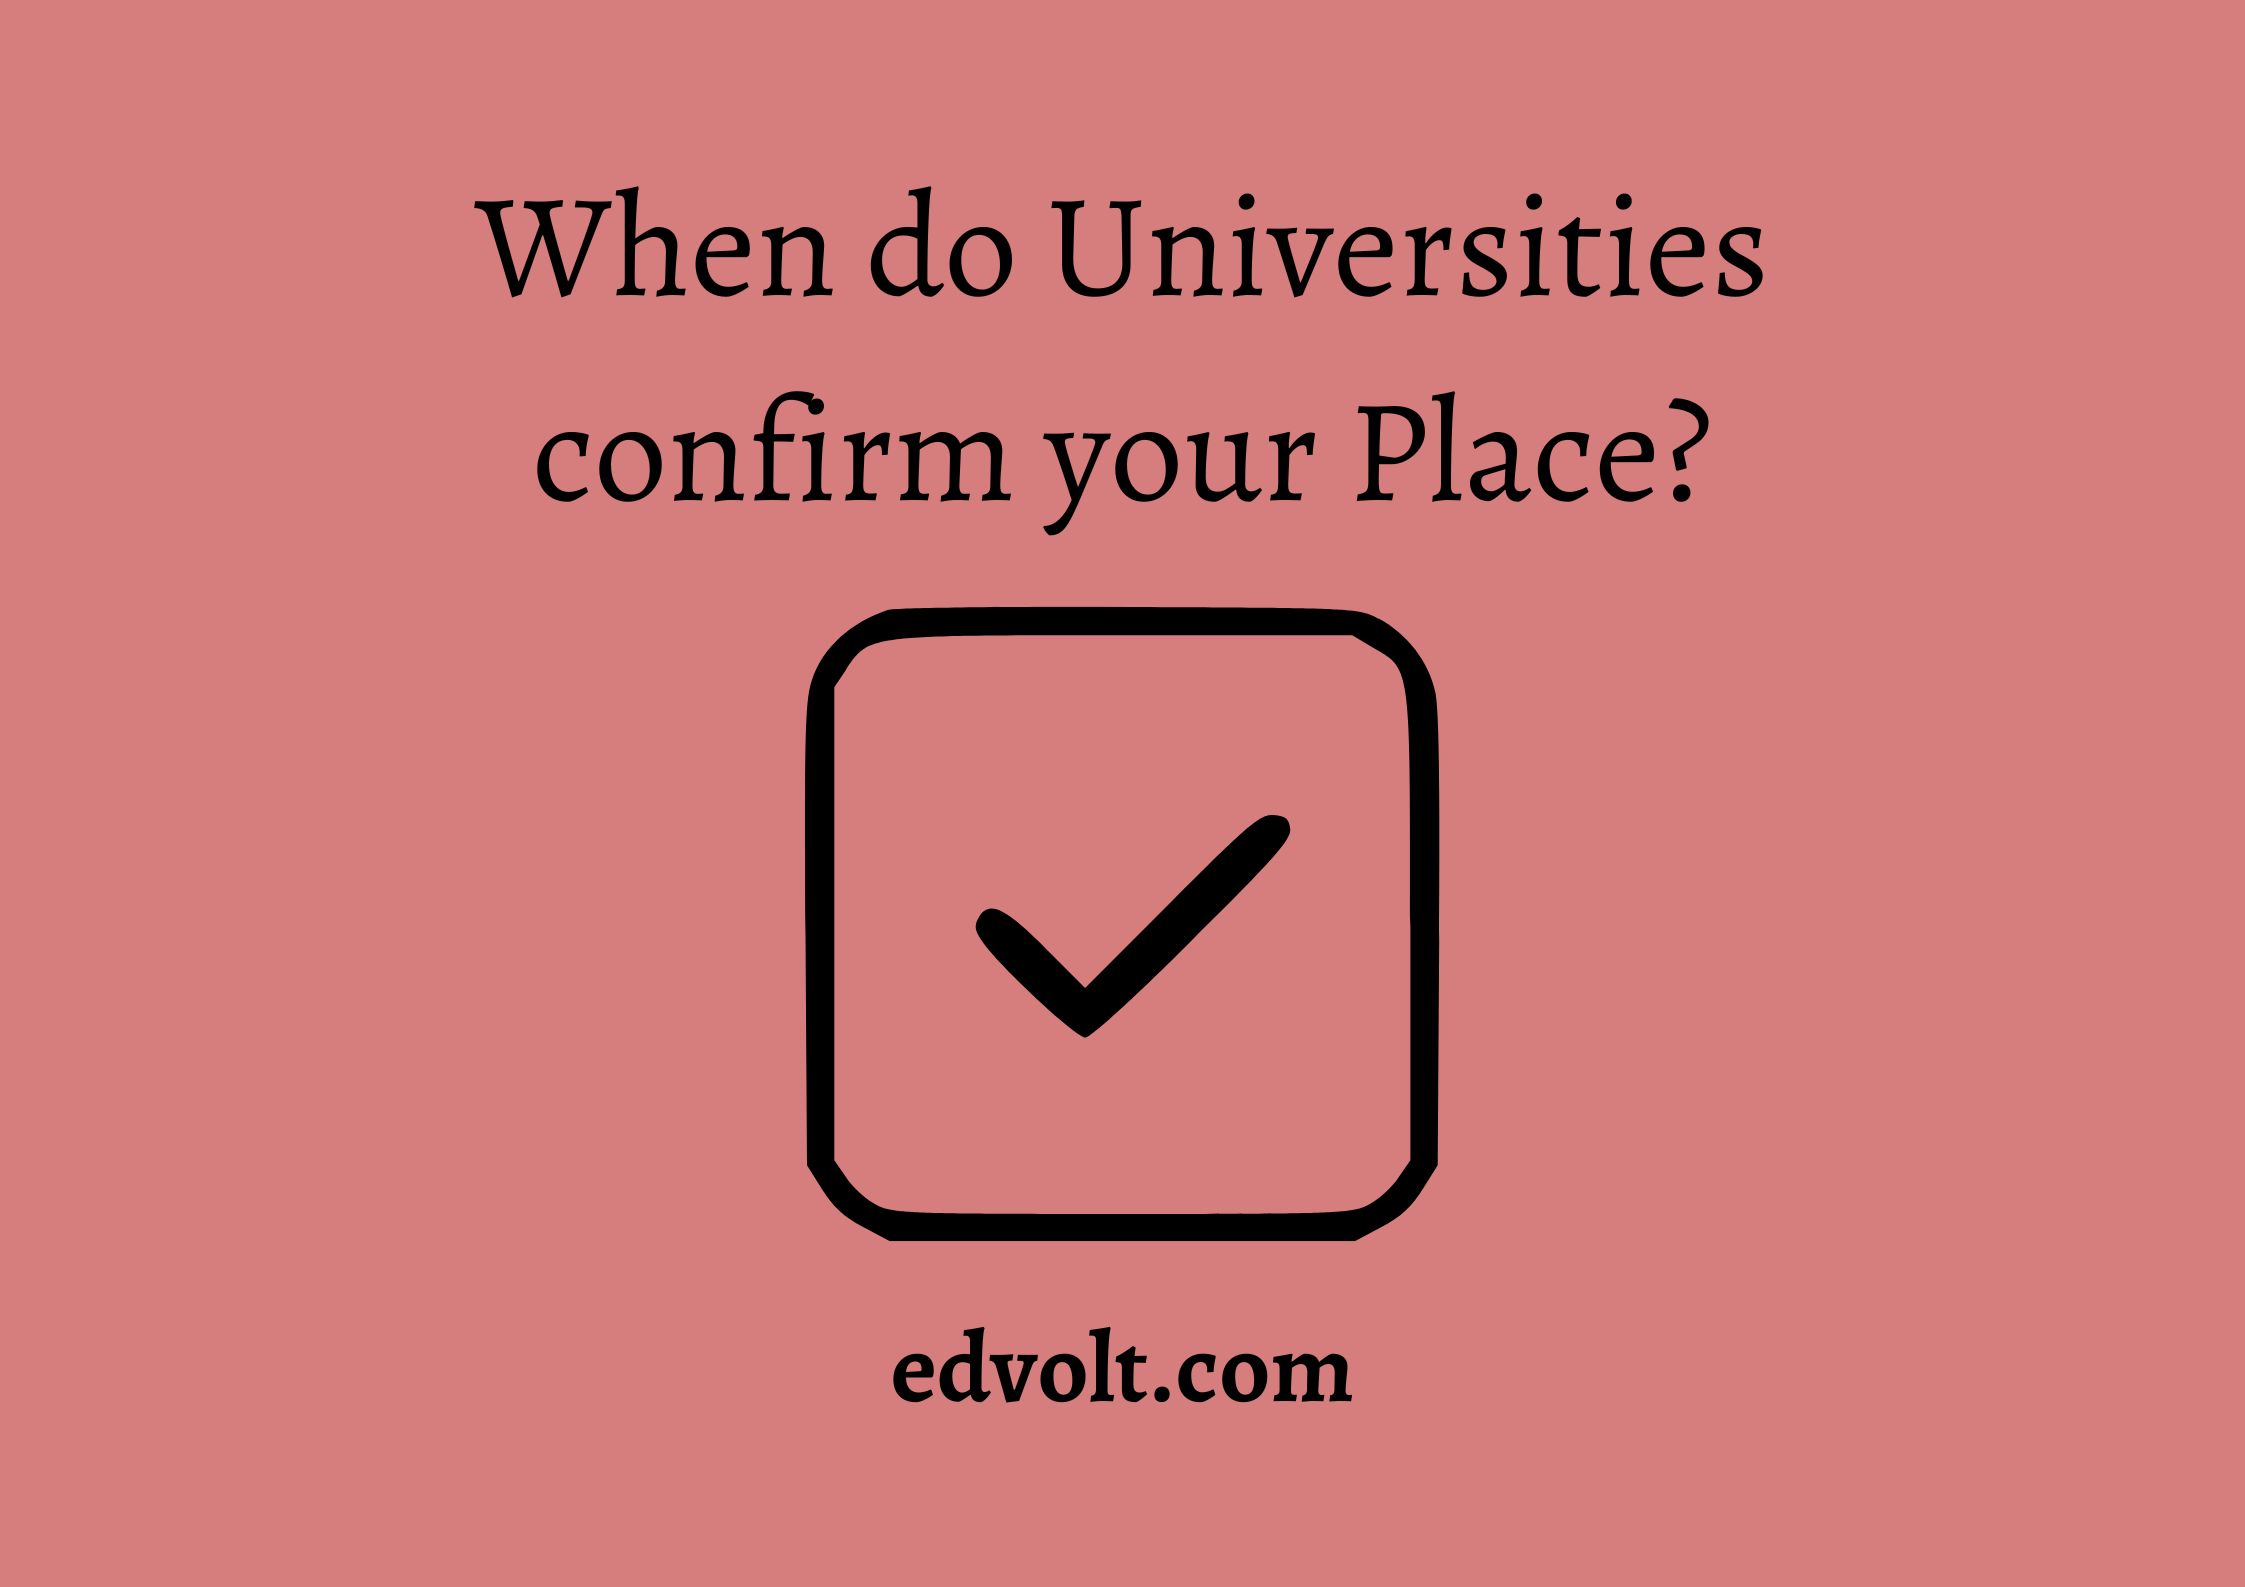 When do Universities confirm your Place?